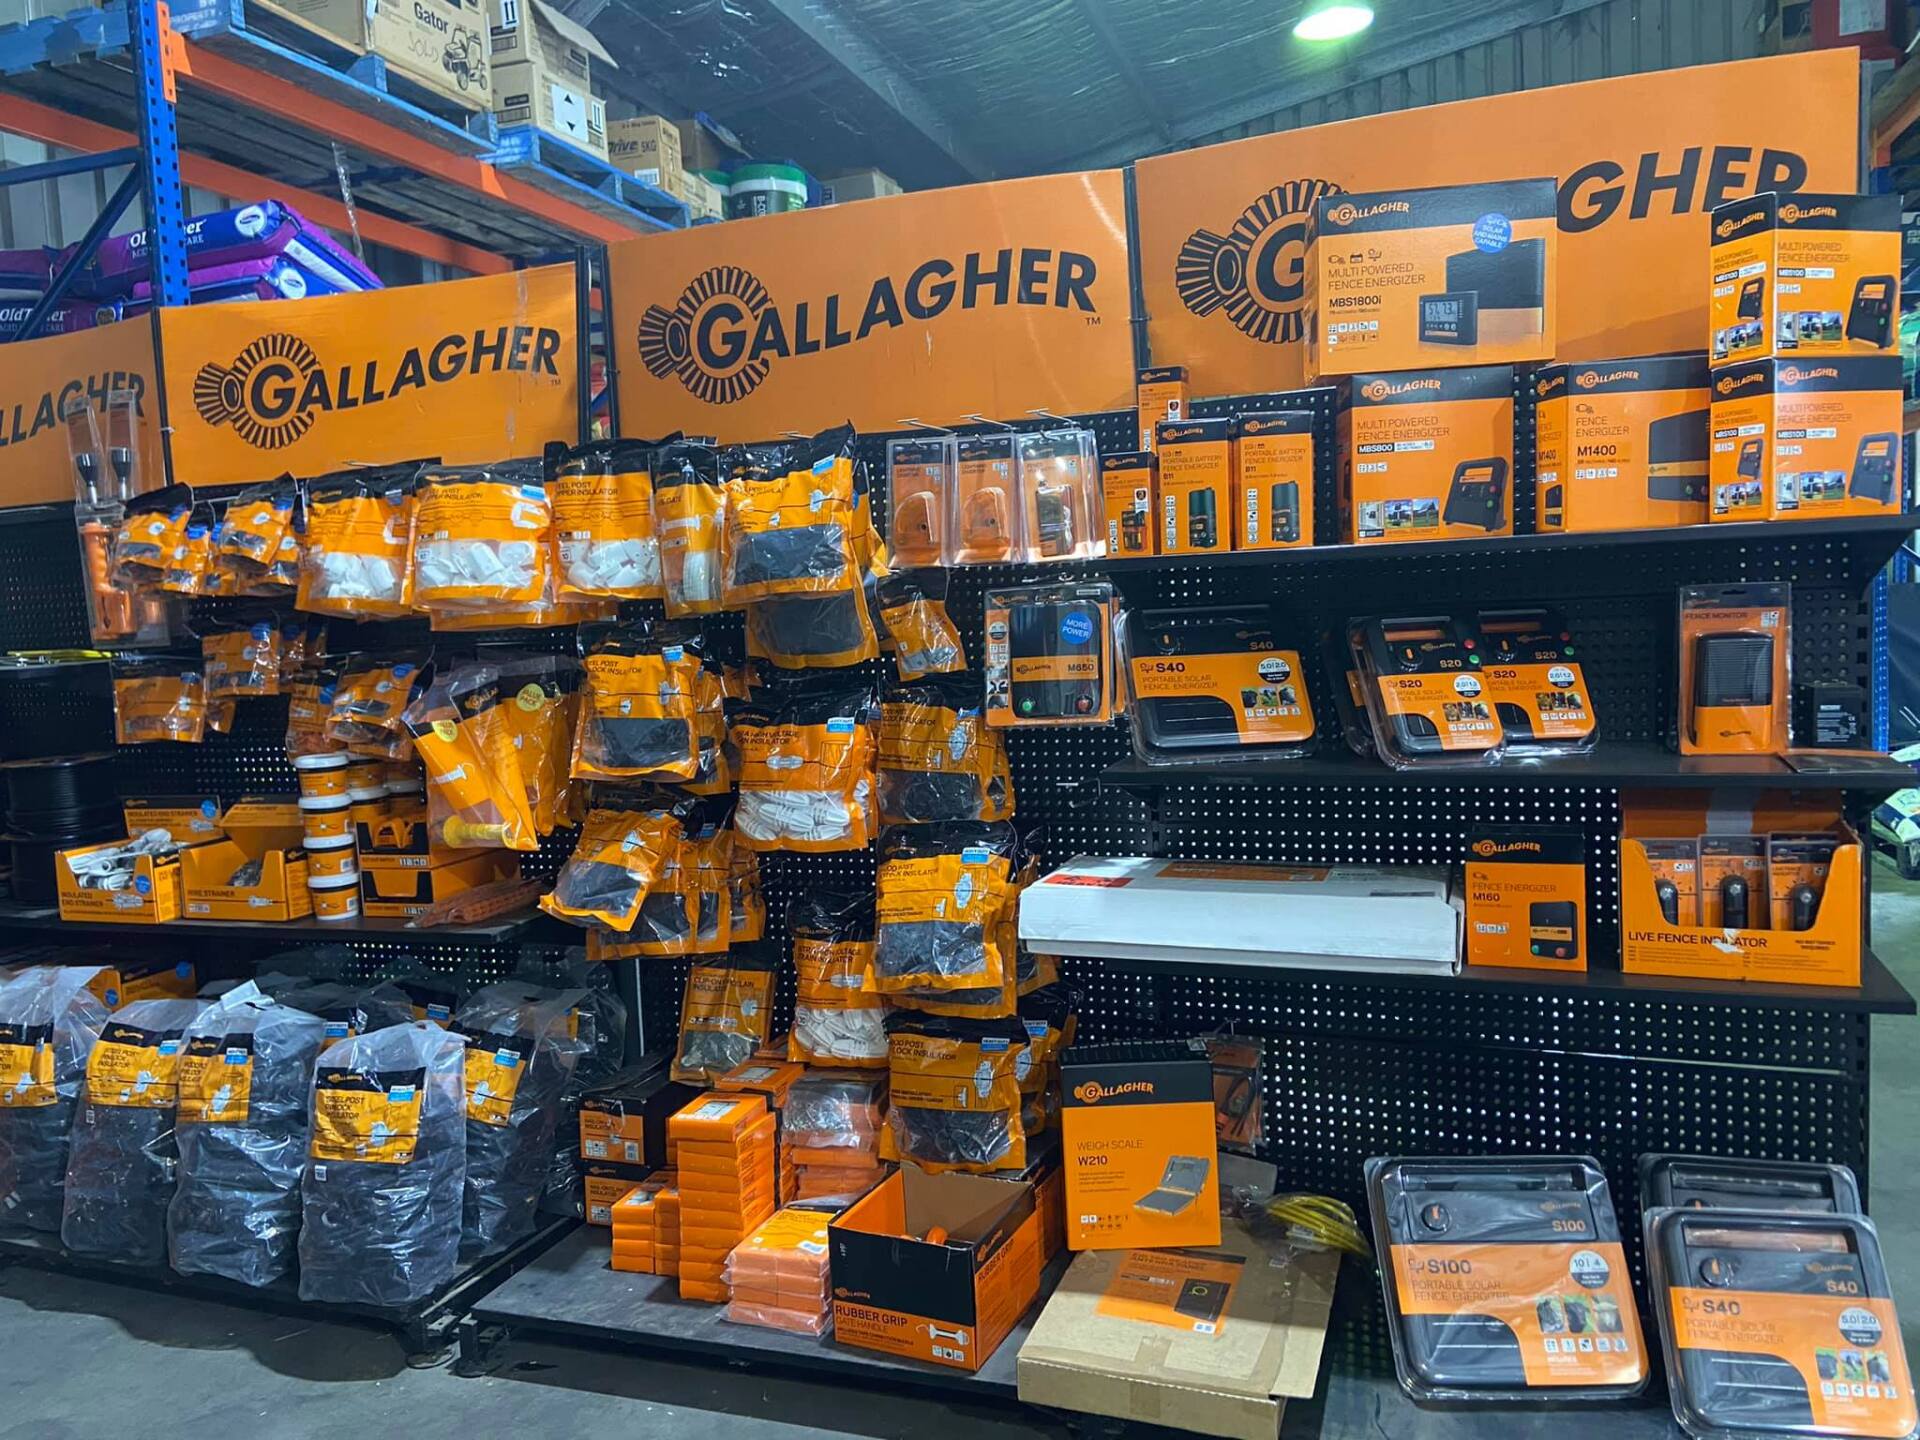 Gallagher Products — Agricultural Supplies in Scone, NSW